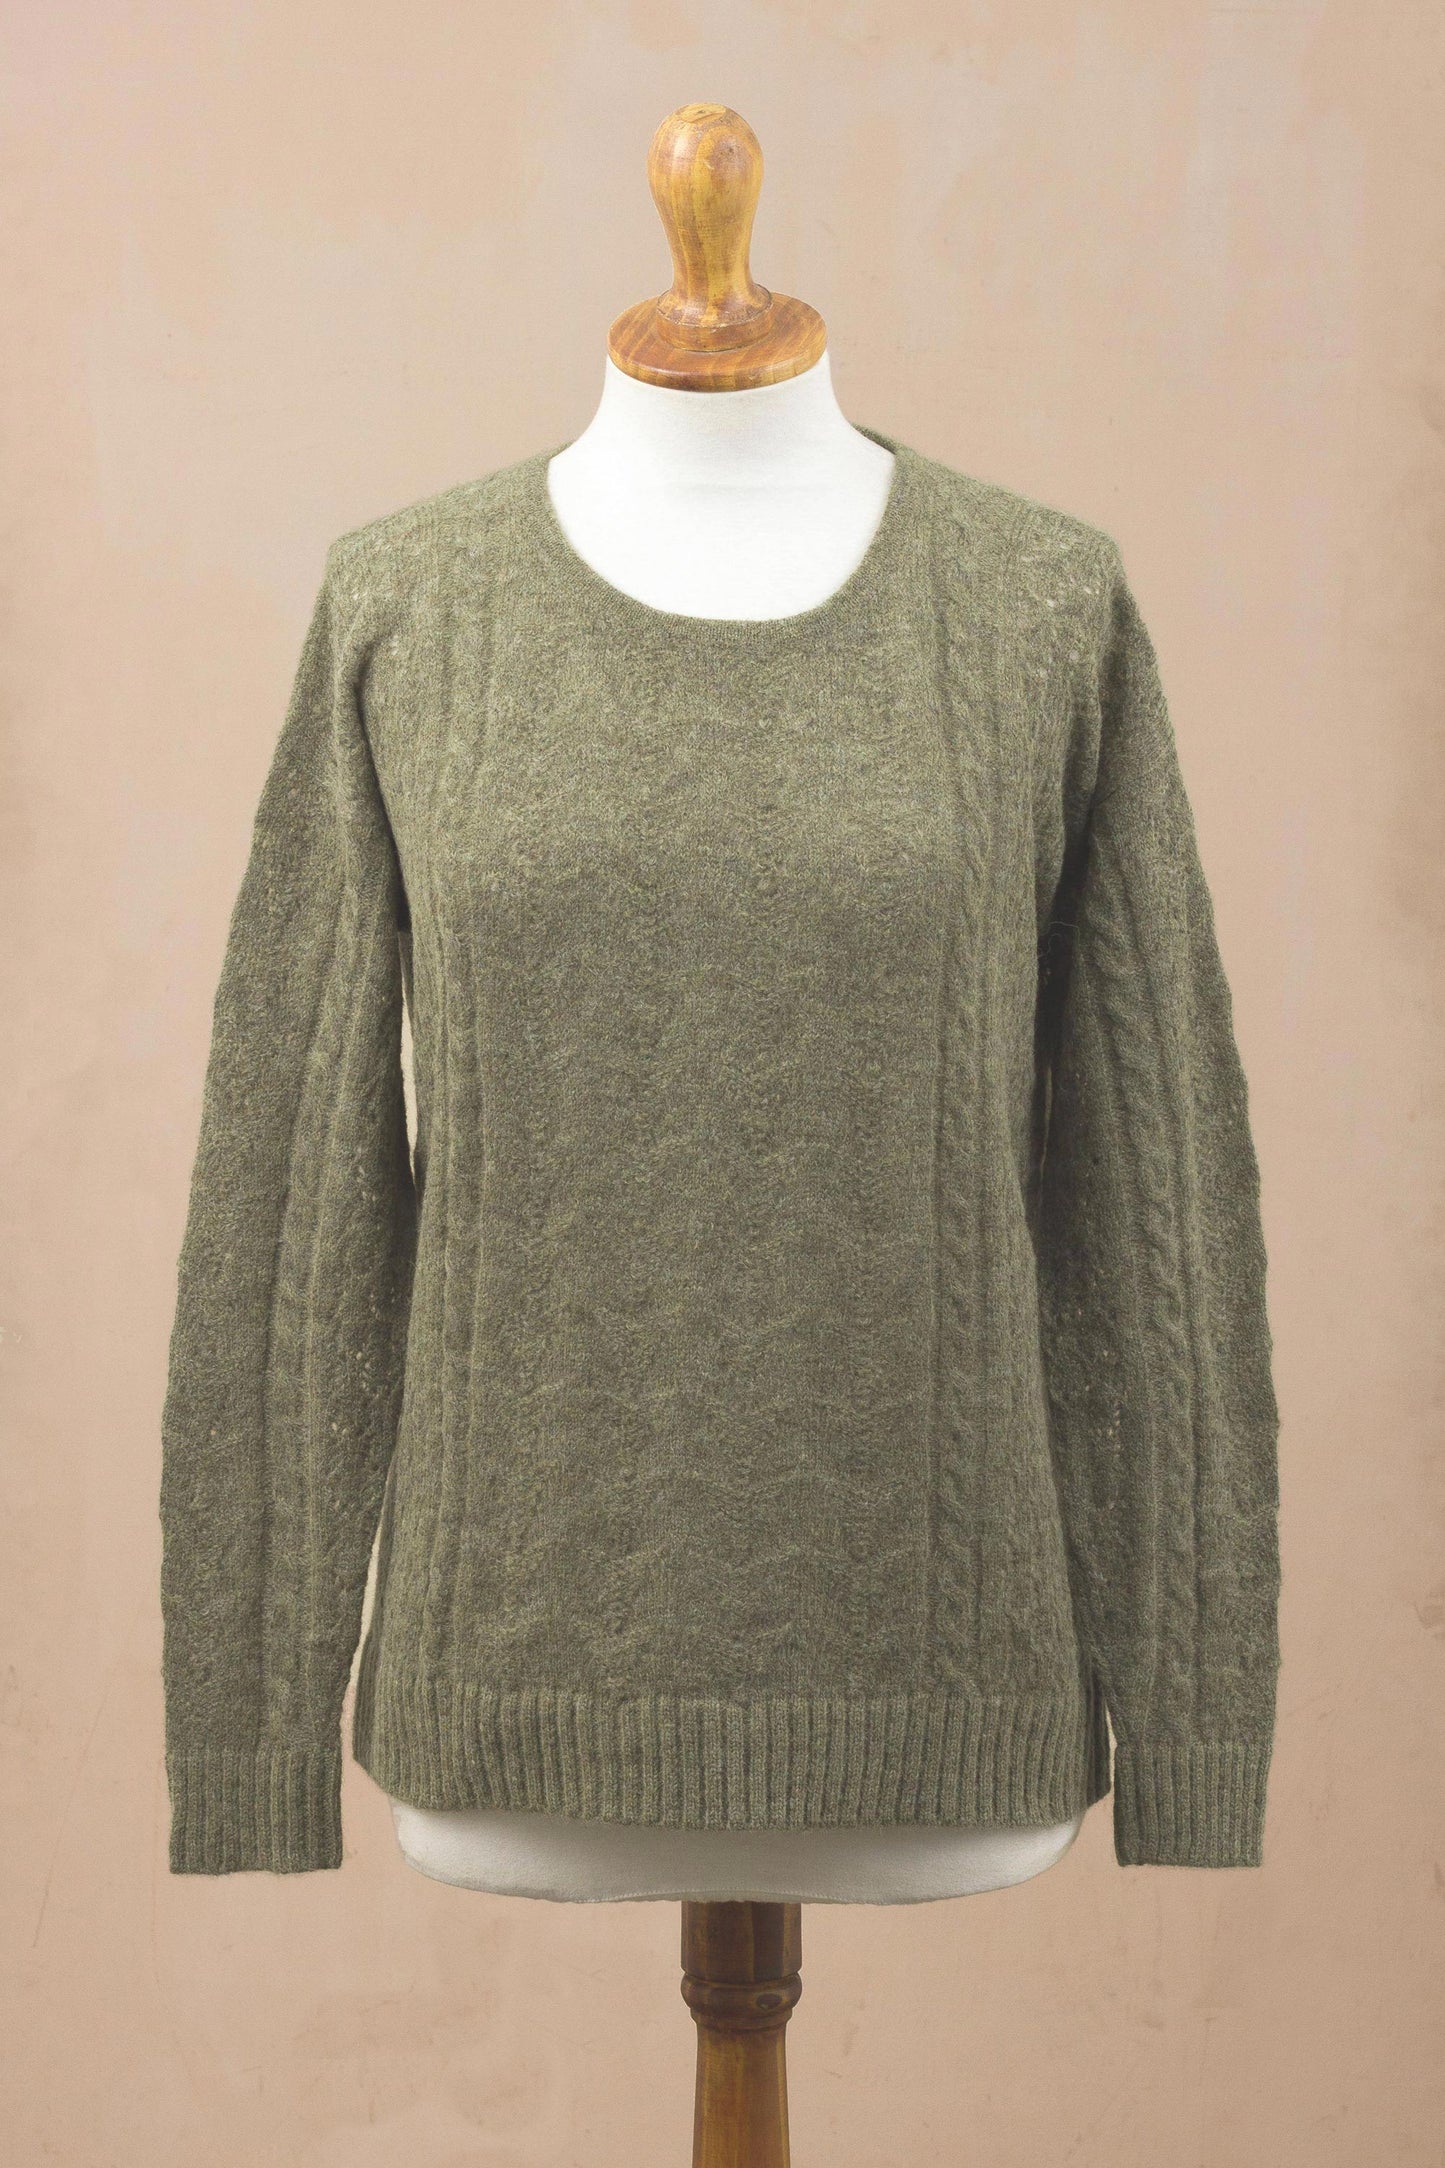 Warm Charm in Olive Cable Knit Baby Apaca Blend Pullover in Olive from Peru